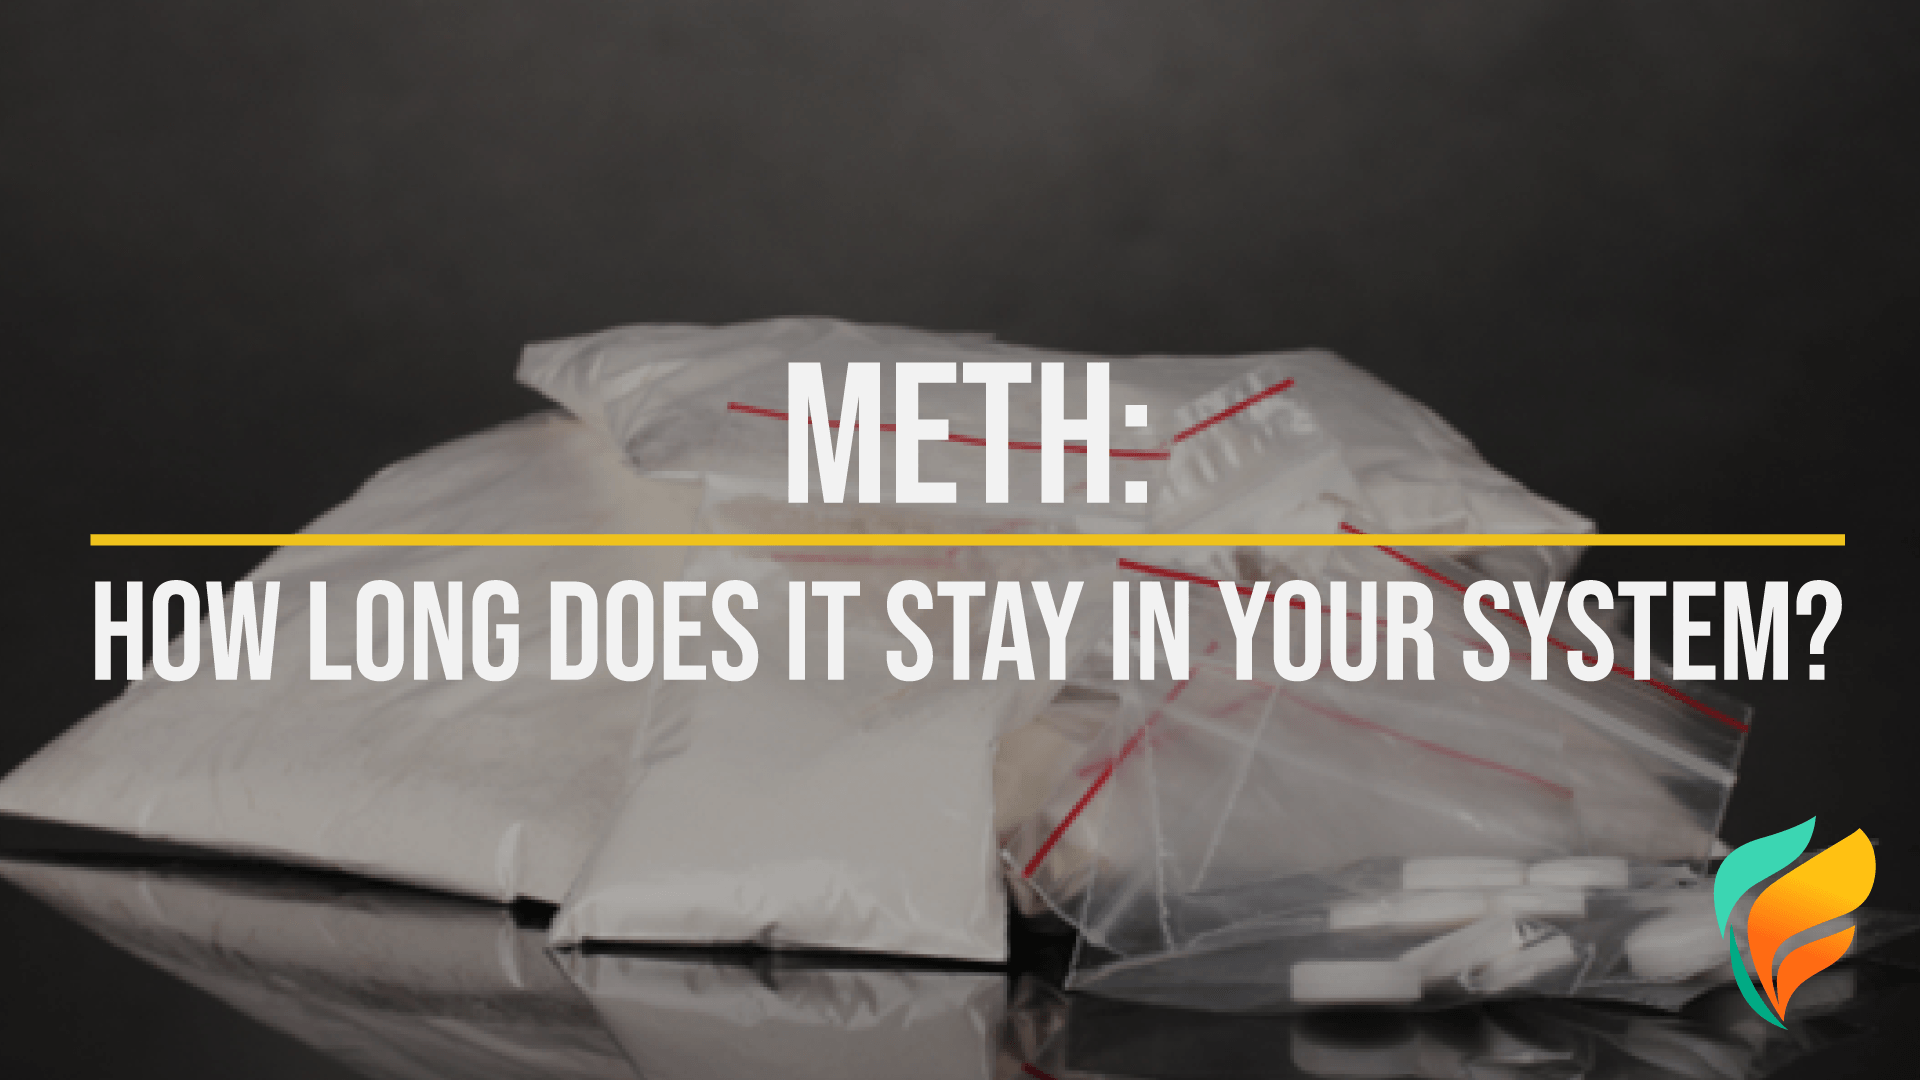 Facts & More About Methamphetamine